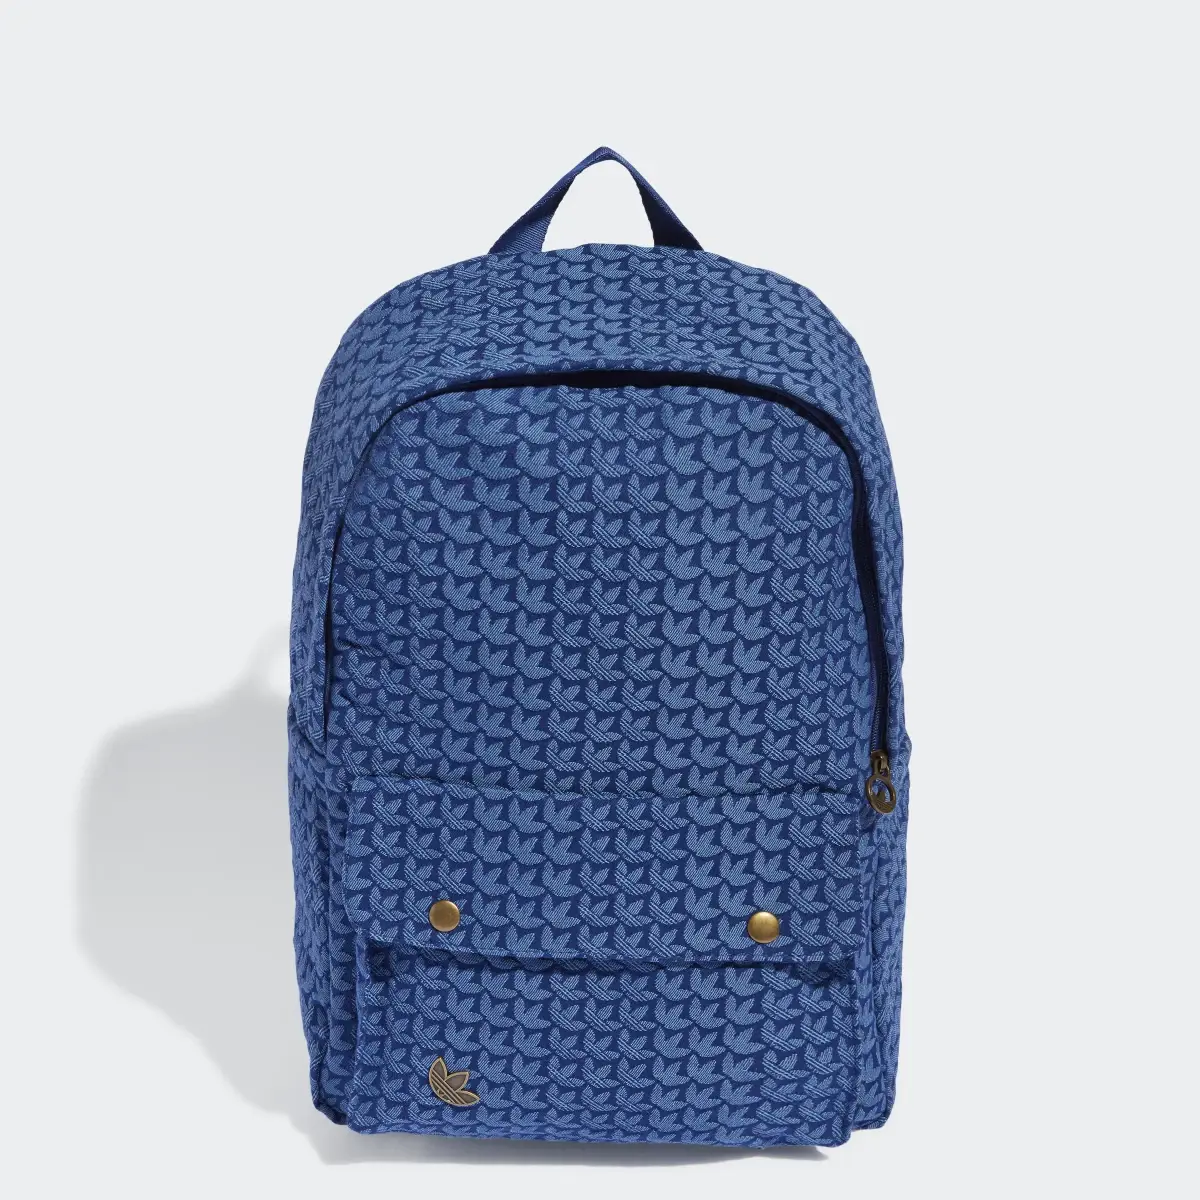 Adidas Classic Backpack. 1